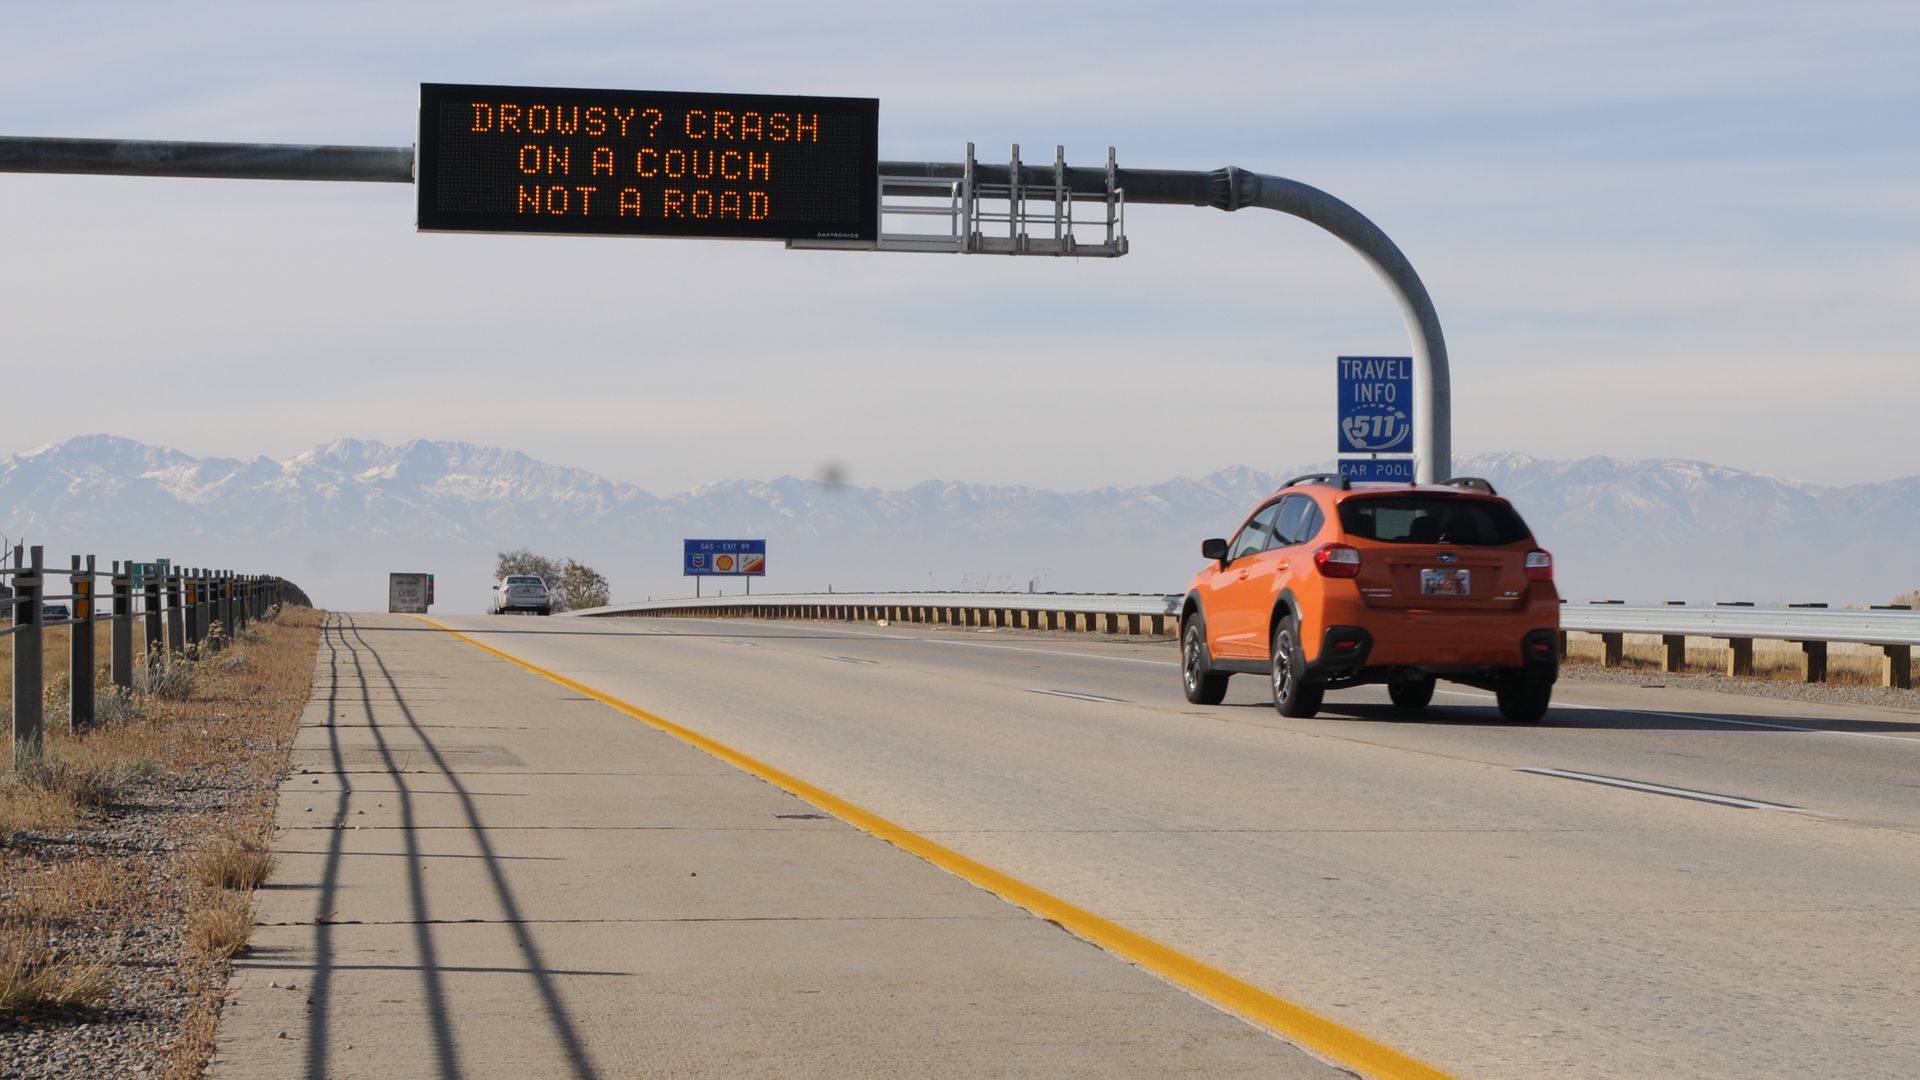 A digital sign over a freeway that says: Drowsy? Crash on a couch not a road.